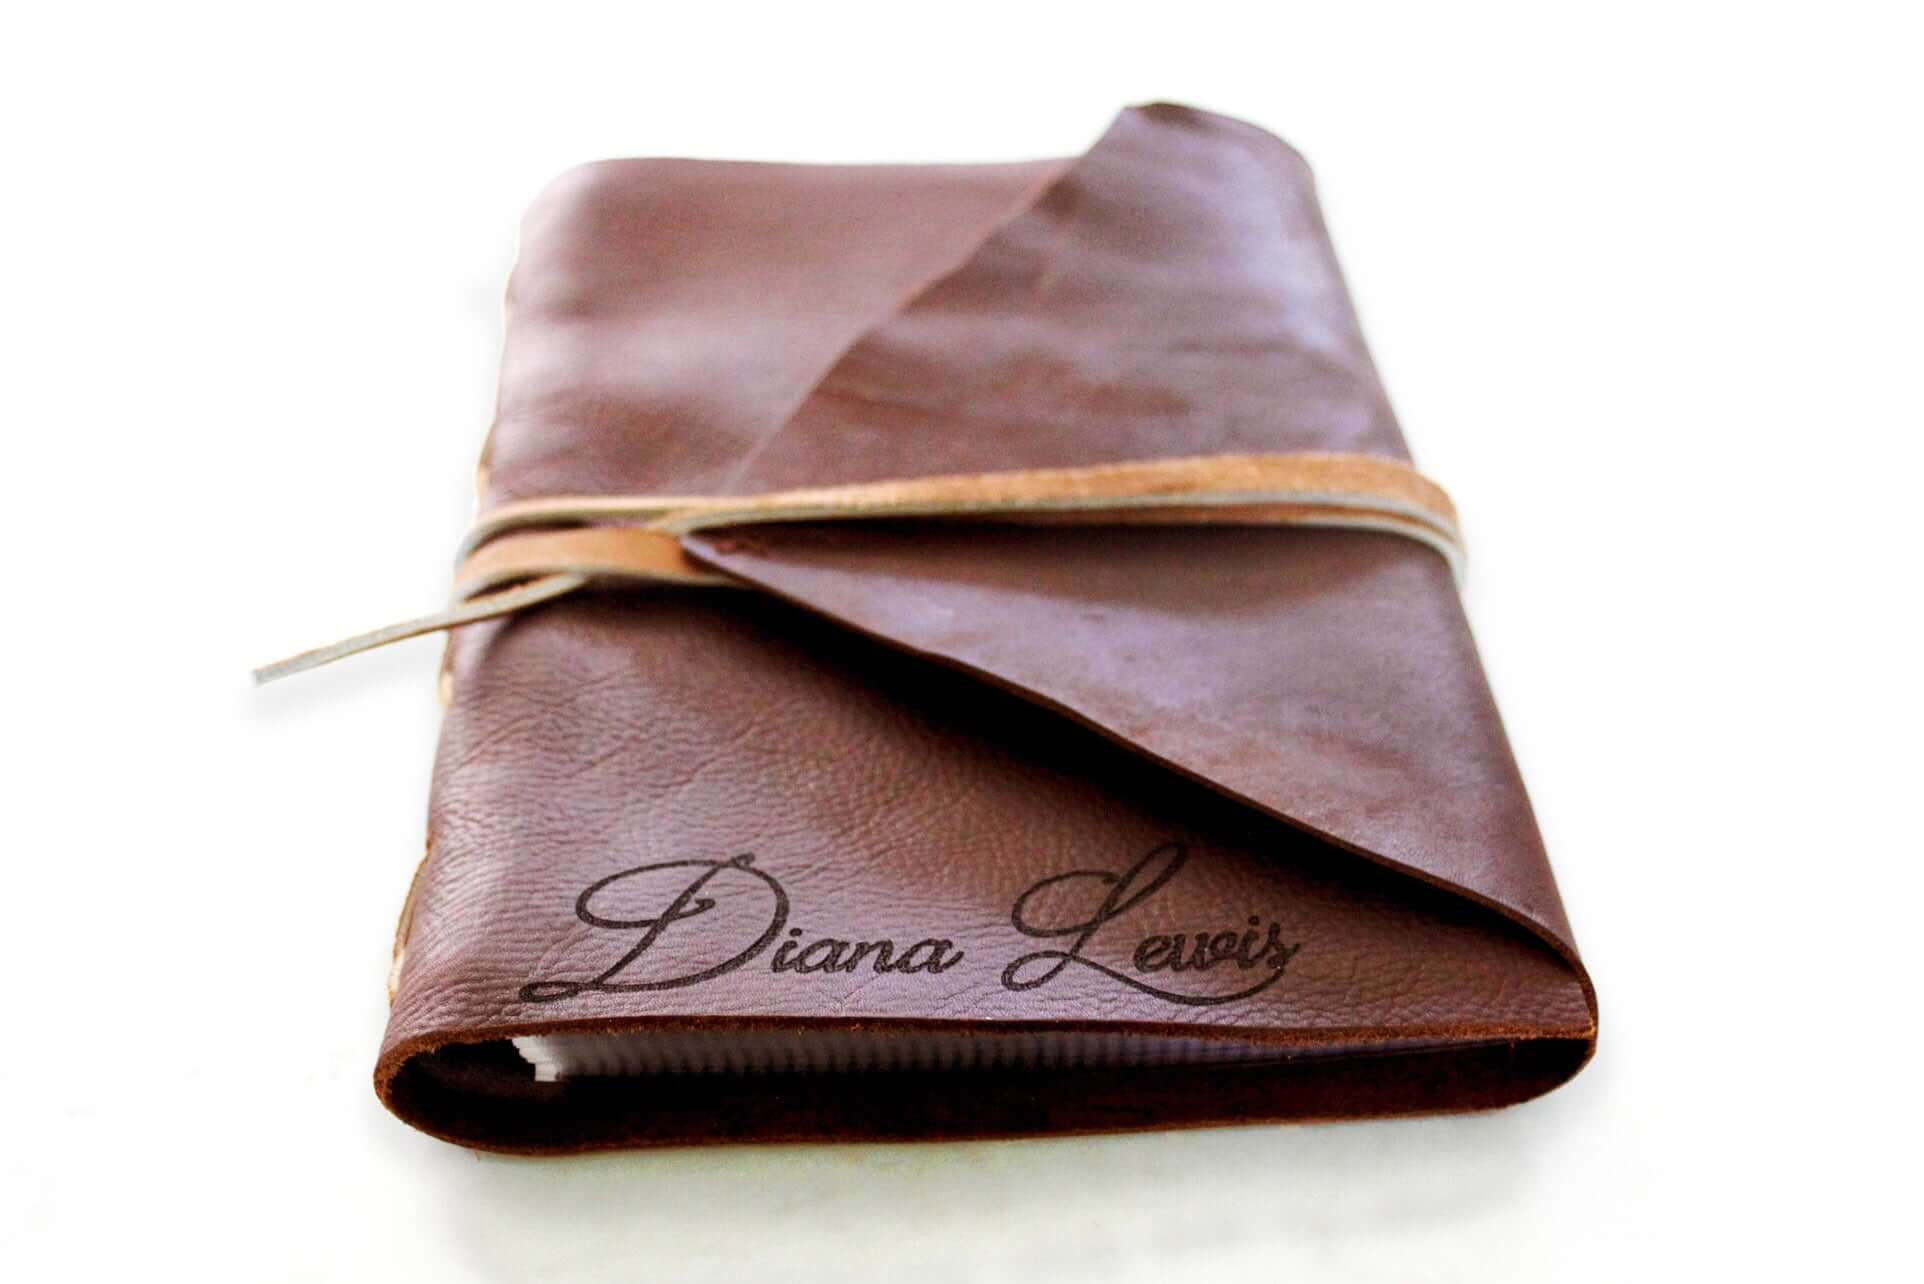 Handmade Leather Diary" | Keep your memories close and your ideas fresh with this one-of-a-kind leather diary by Rustic Engravings - the perfect gift for anyone with a love for the handmade.